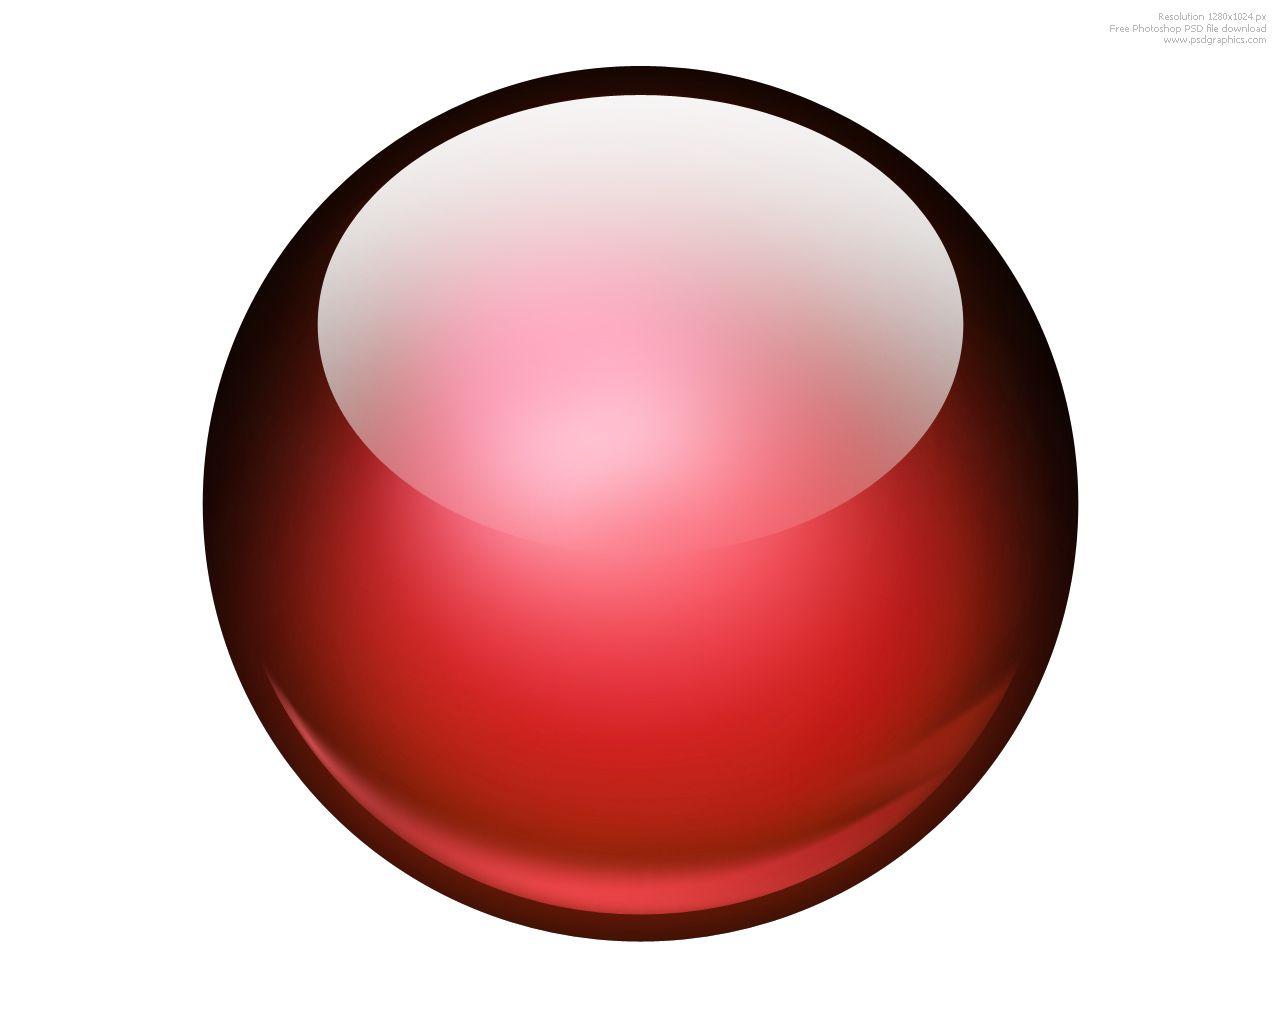 Red Sphere Logo - Free Sphere Icon 233174. Download Sphere Icon